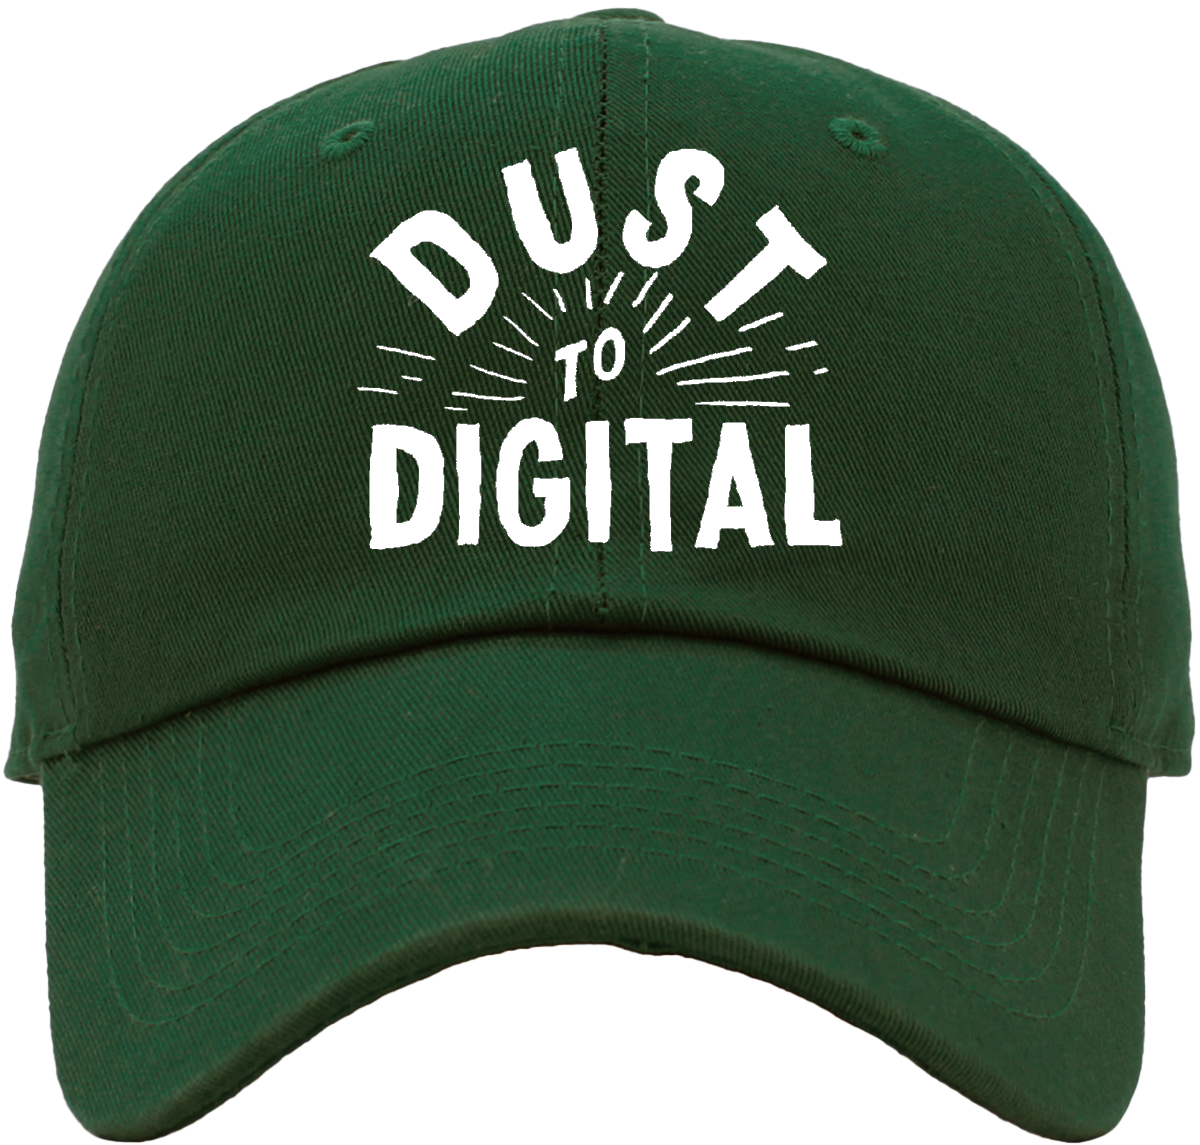 Dust-to-Digital and Baseball Burgundy) (Available Hat Green, Blue, in |